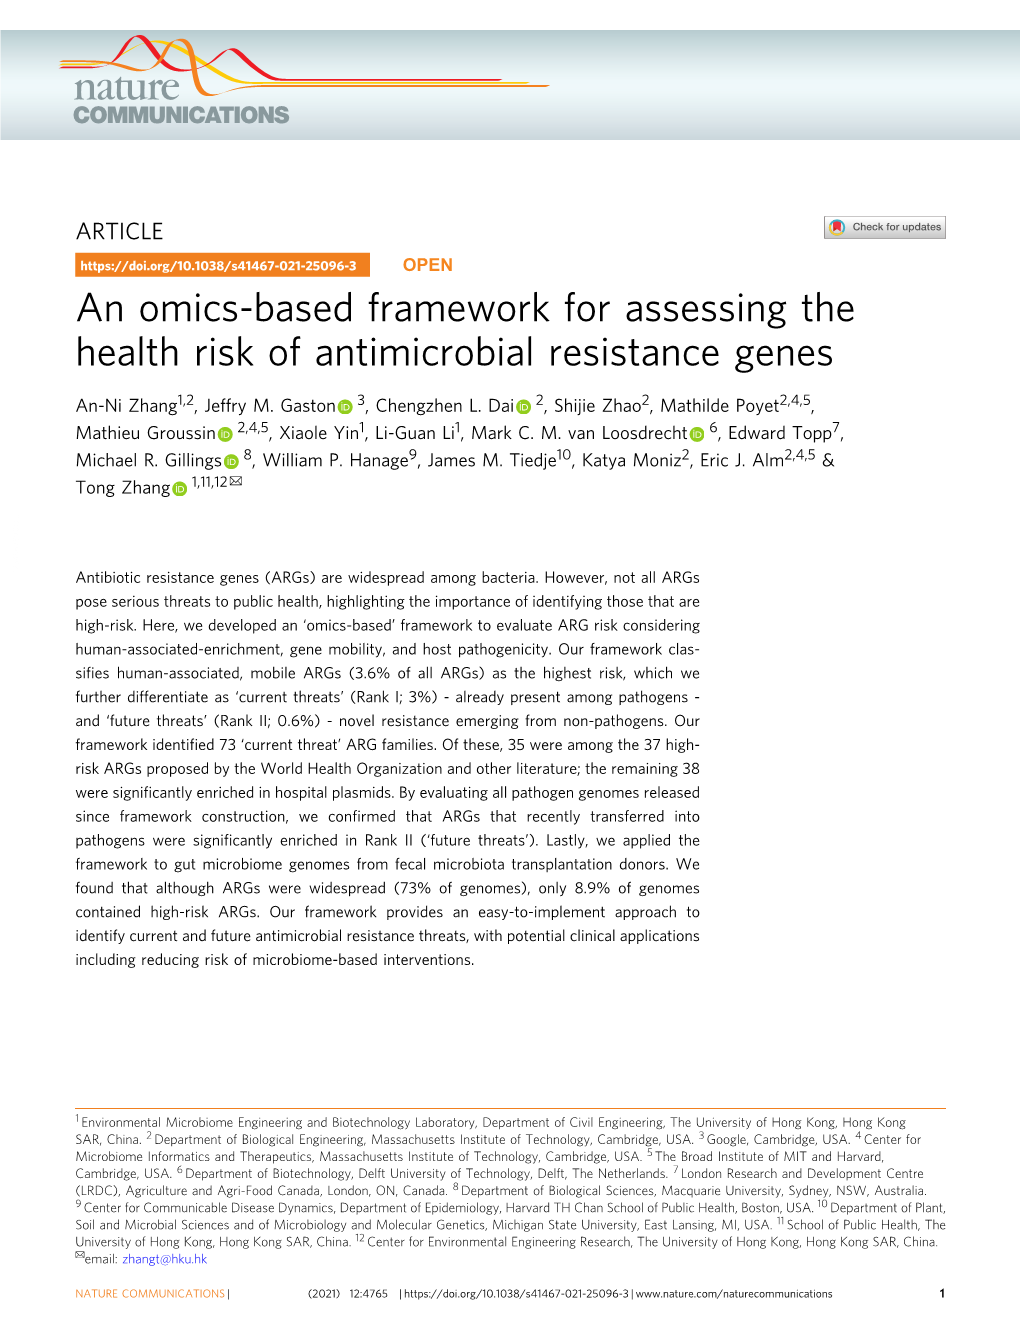 An Omics-Based Framework for Assessing the Health Risk of Antimicrobial Resistance Genes